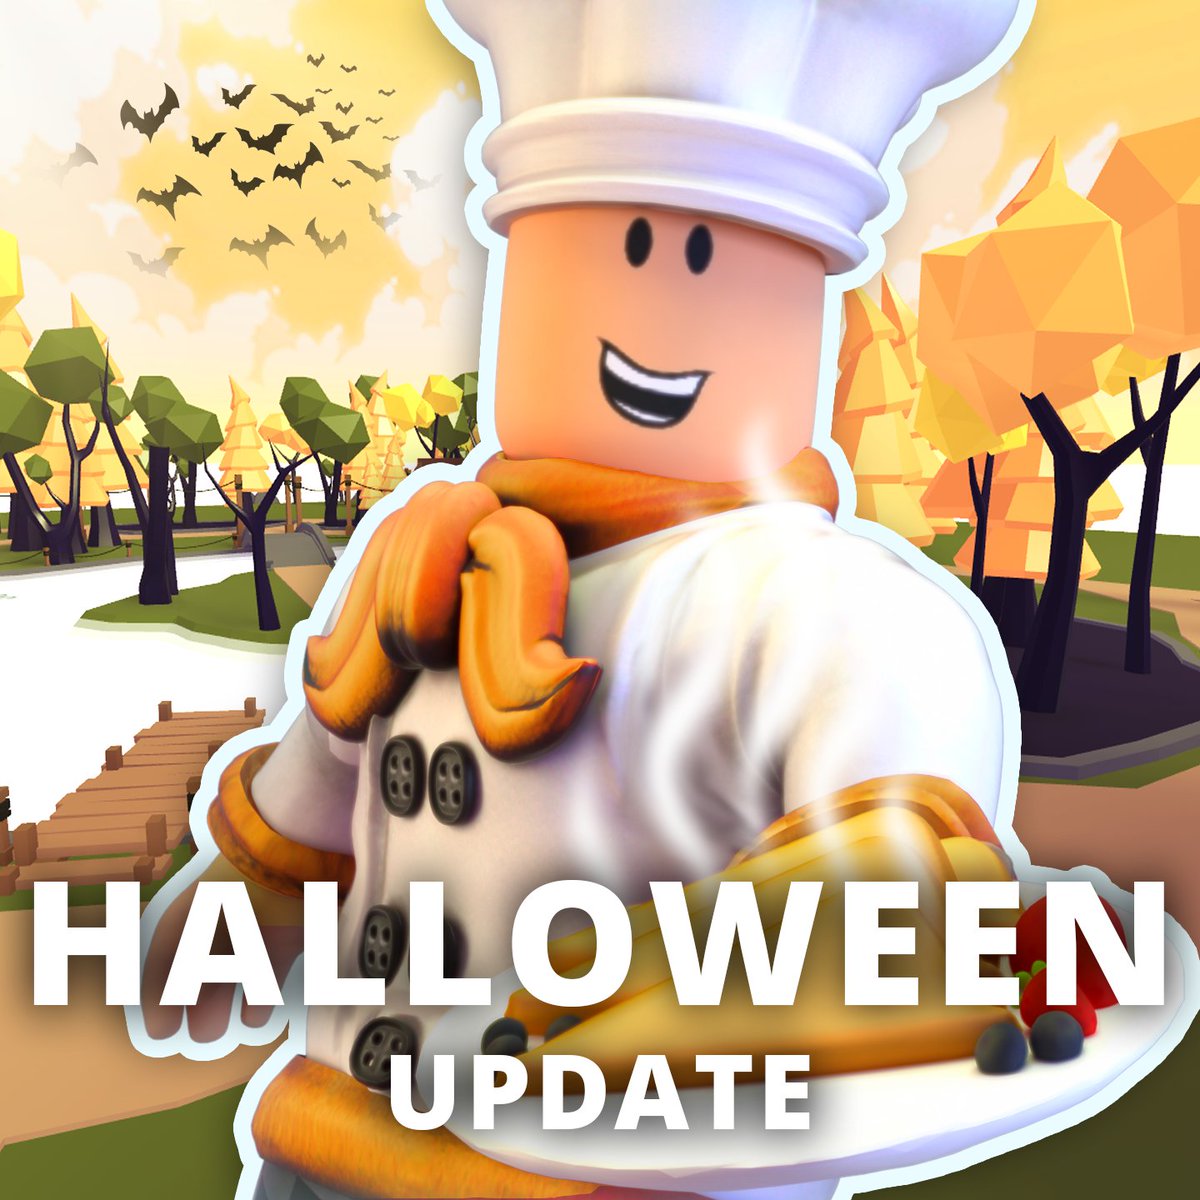 Big Games On Twitter Boo The Halloween Update Is Live For My Restaurant Check Out The Spoooky Map And Five New Limited Halloween Themed Items Part 2 Coming Very Soon - getting robux from pumkin game